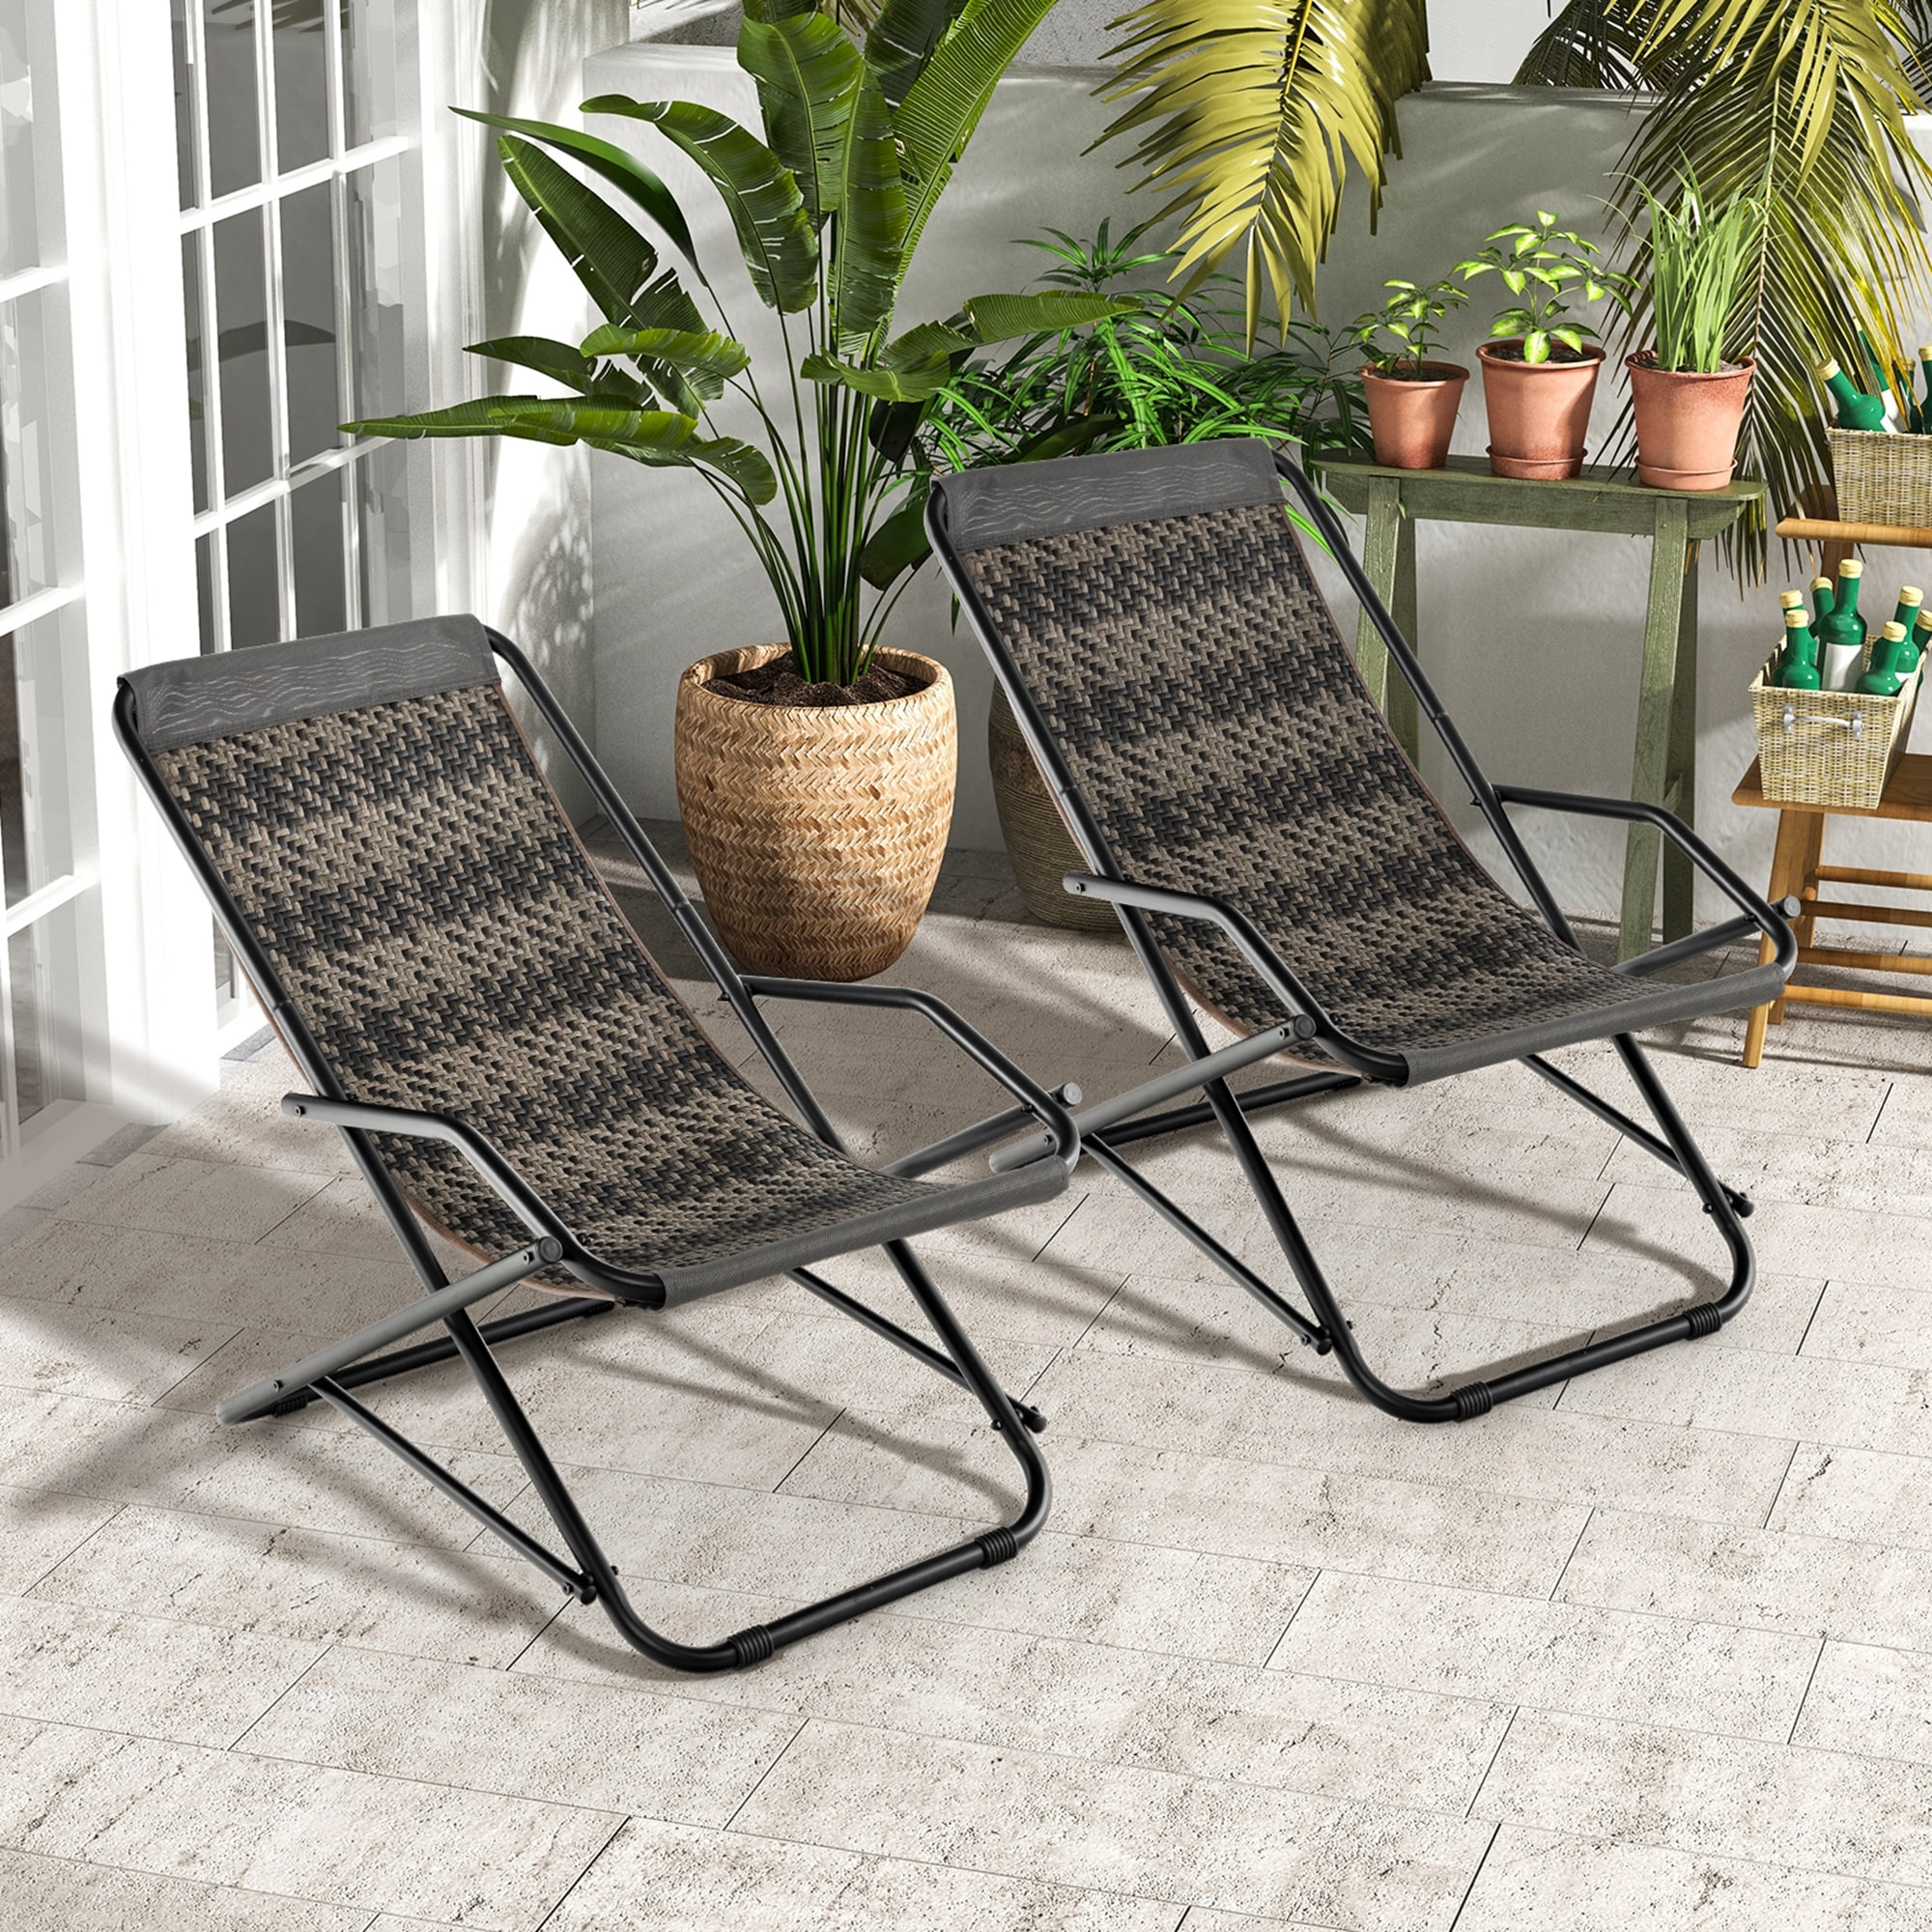 Bonnlo Folding Recliner Chair with Canopy (Grey)